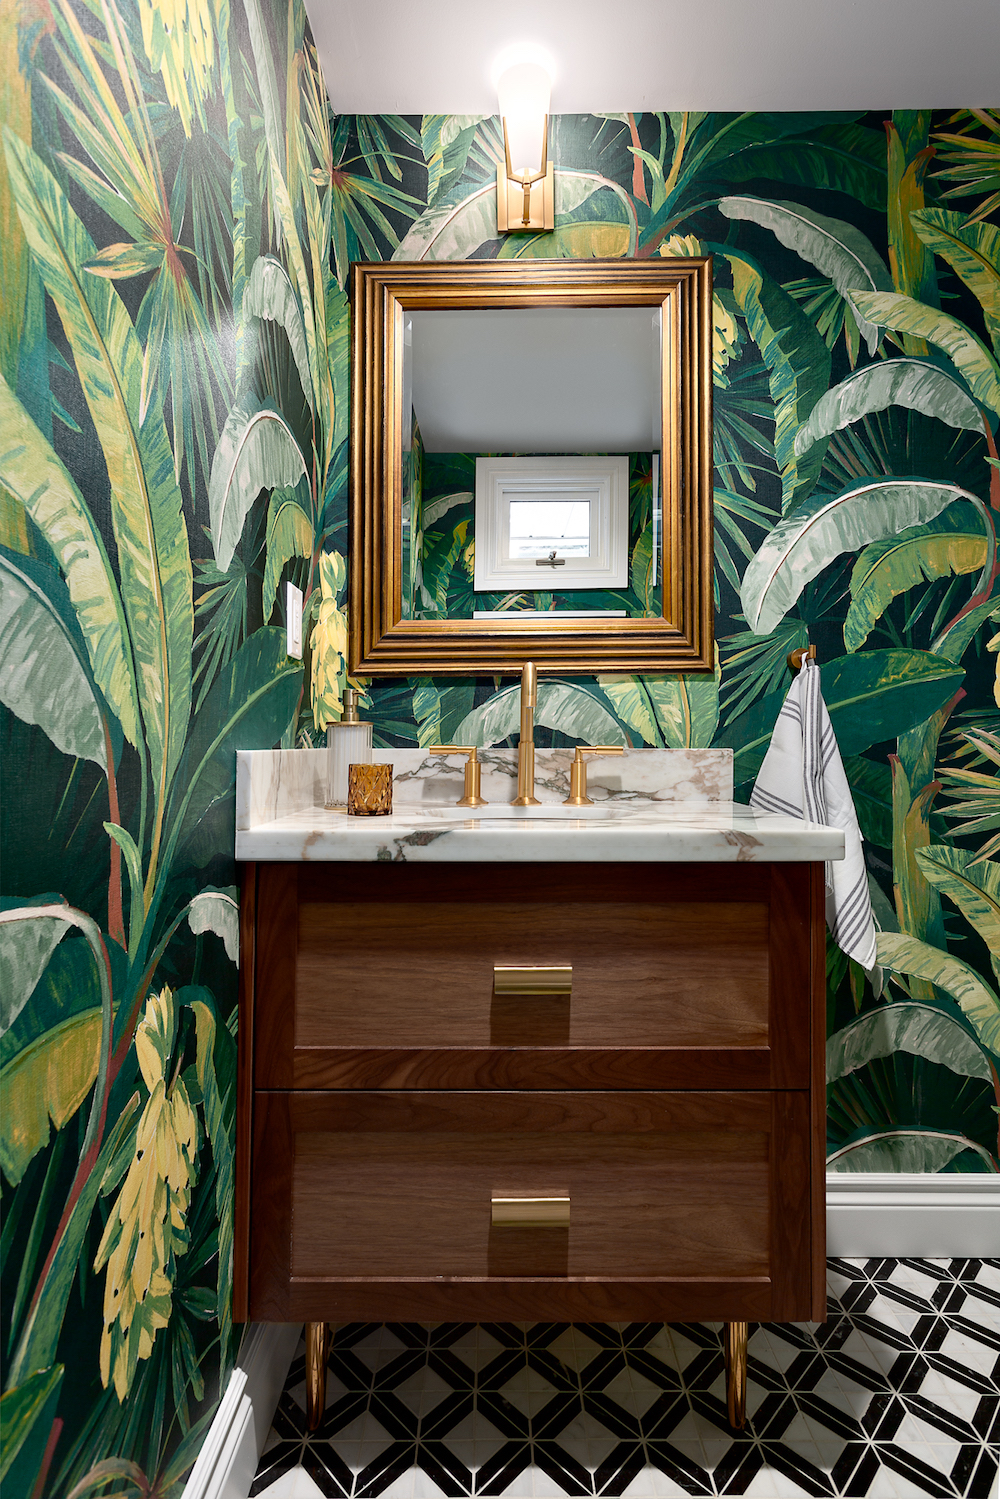 Tropical green wallpaper in bathroom with black-and-white floor